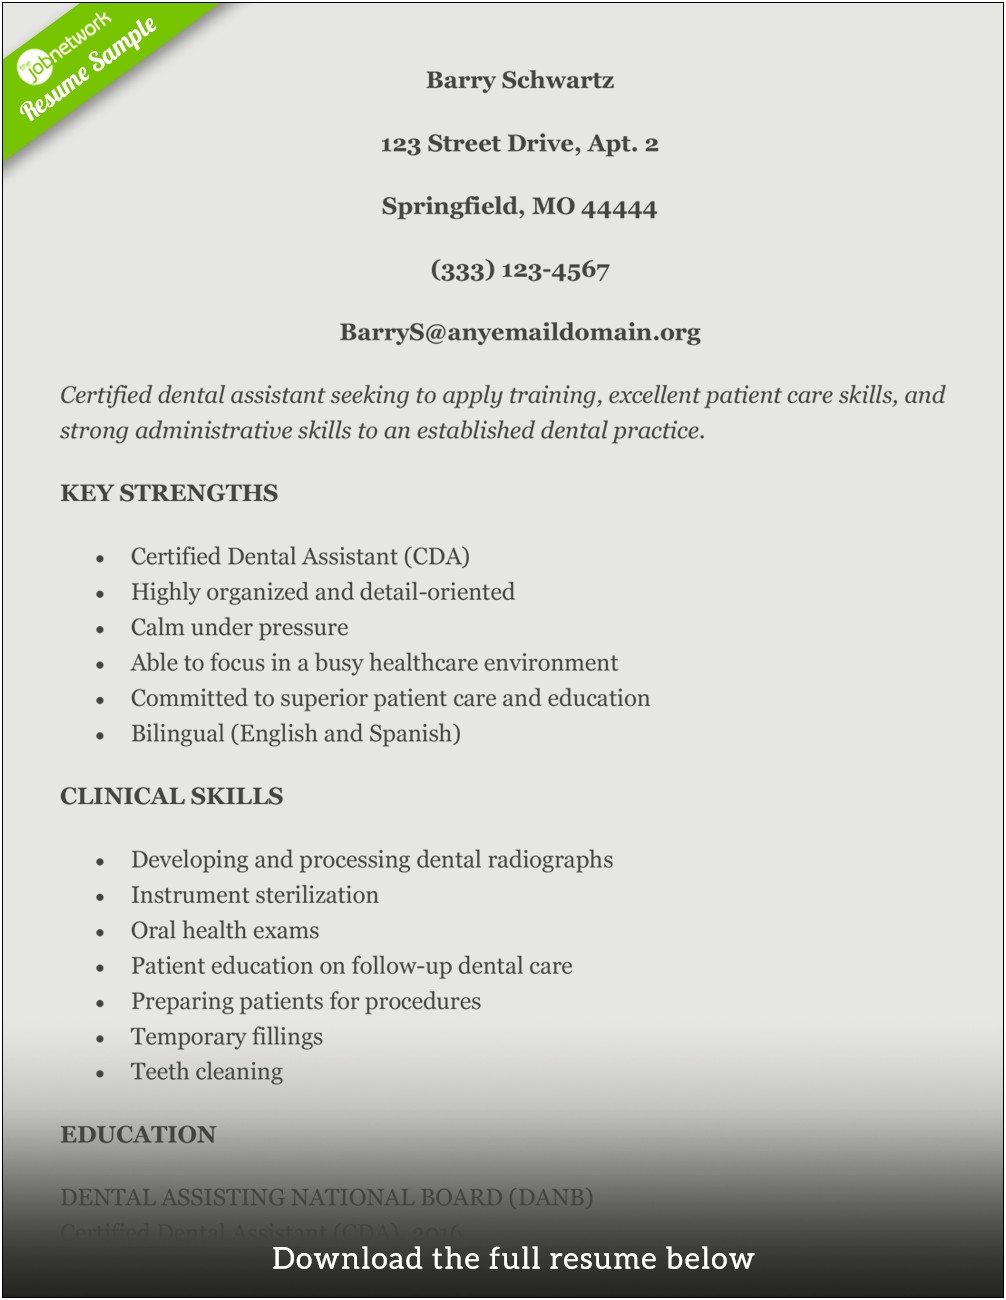 Resume For Apply Job As Dental Assistant